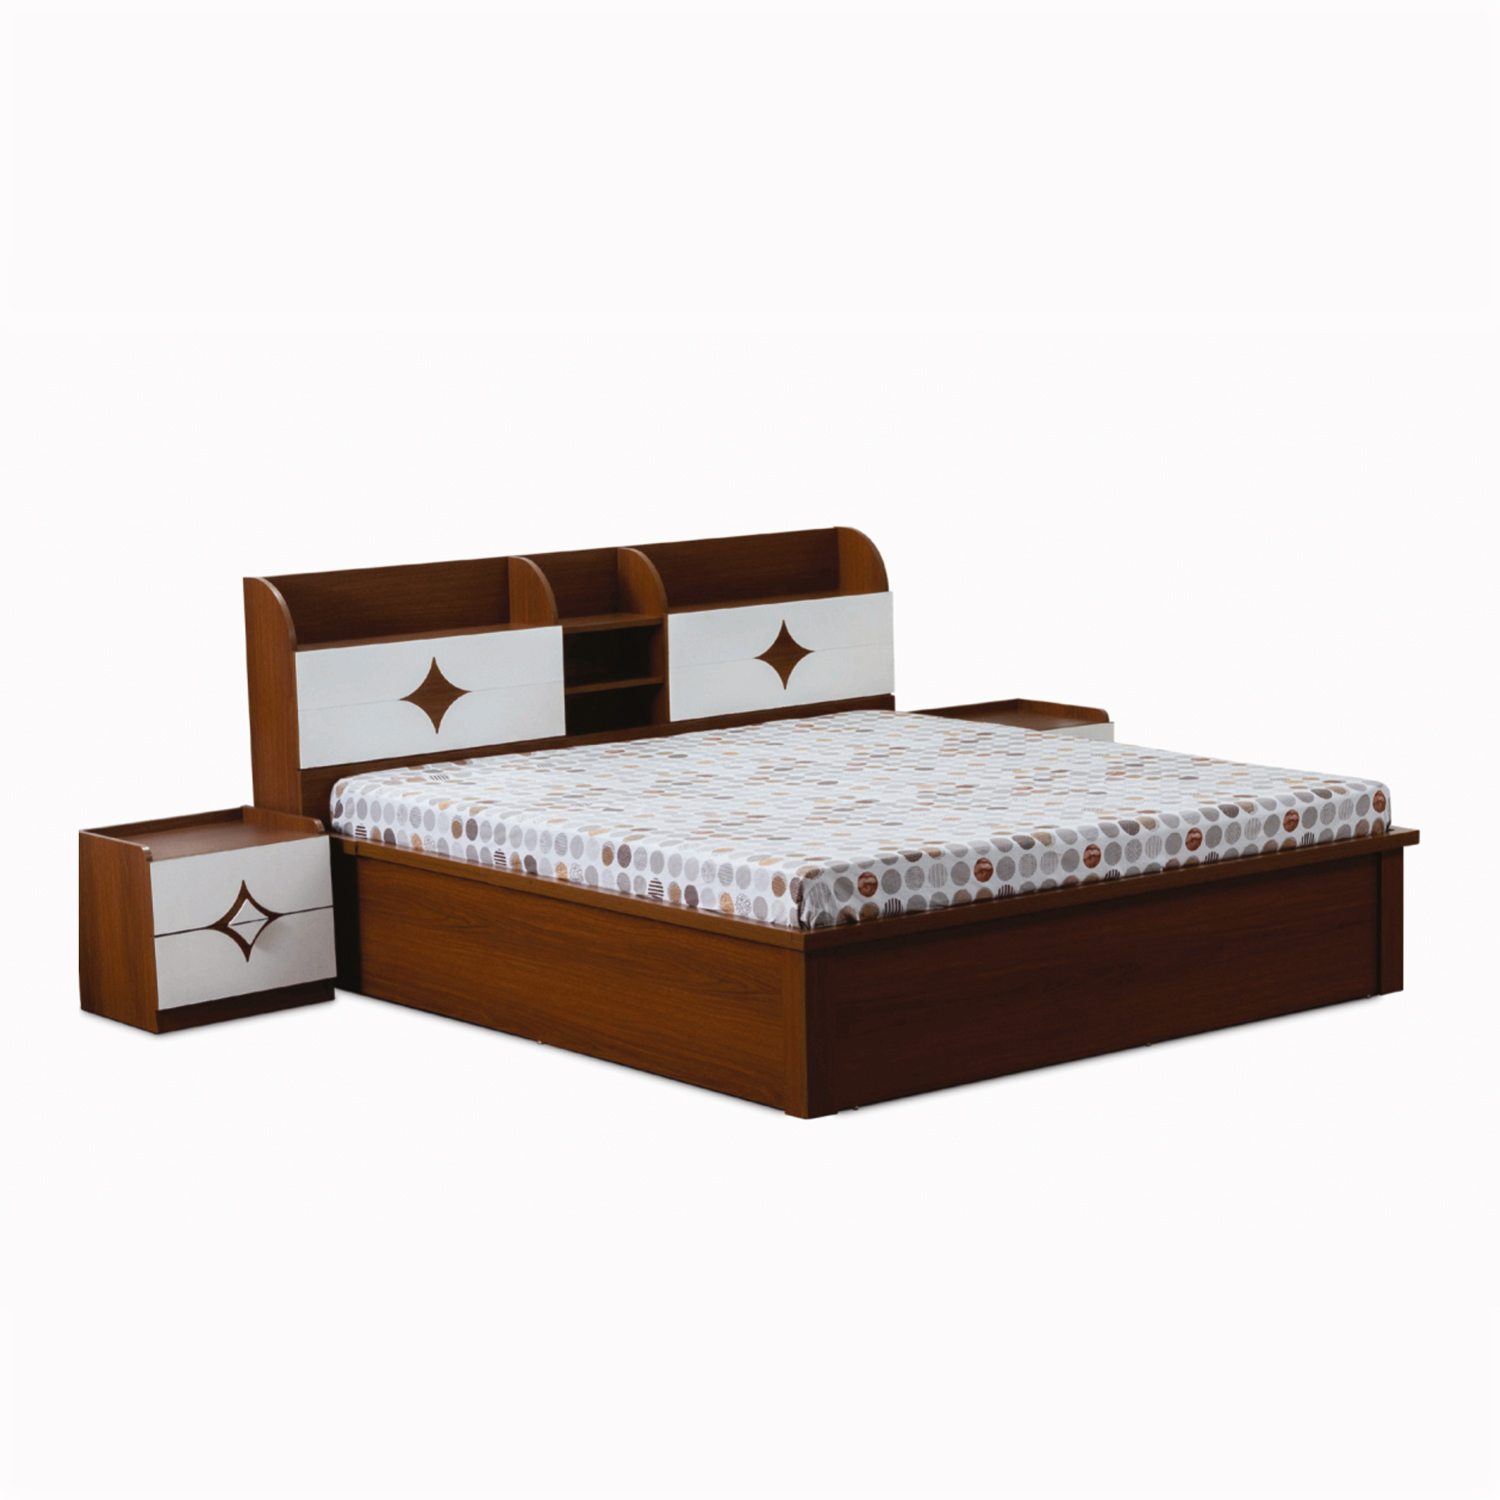 Star PLM King Bed